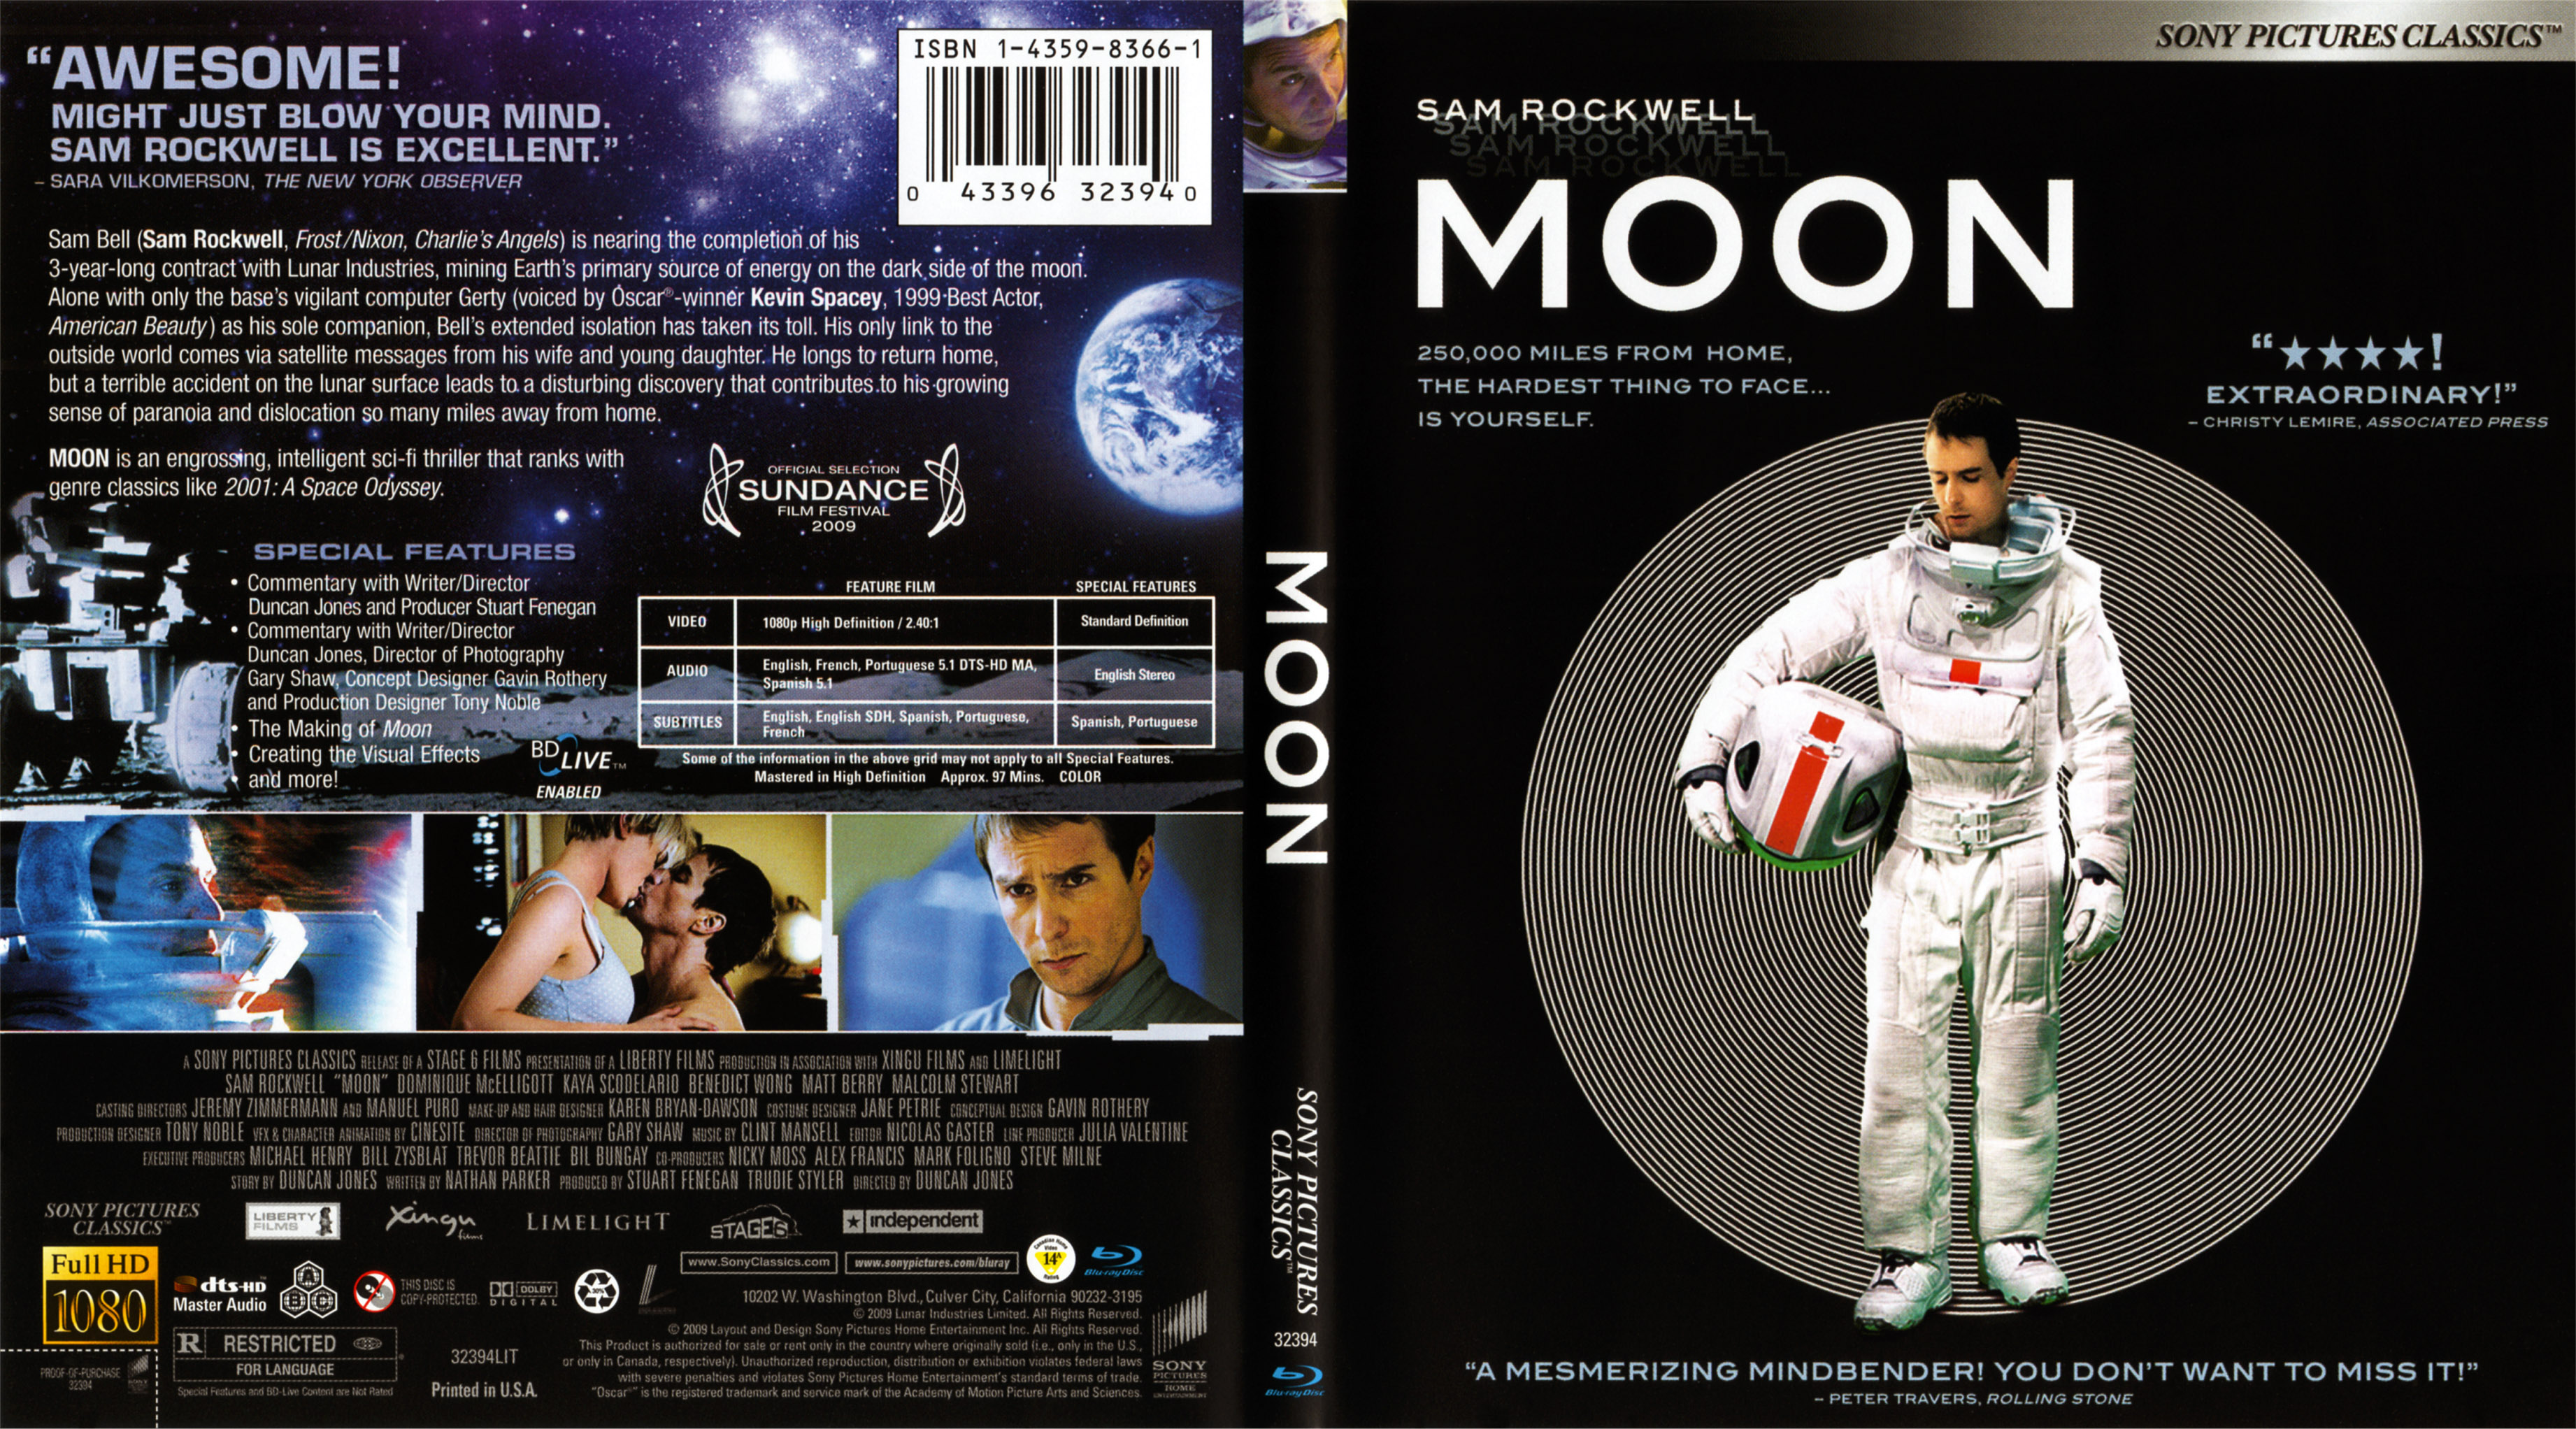 Jaquette DVD Moon Zone 1 (BLU-RAY)